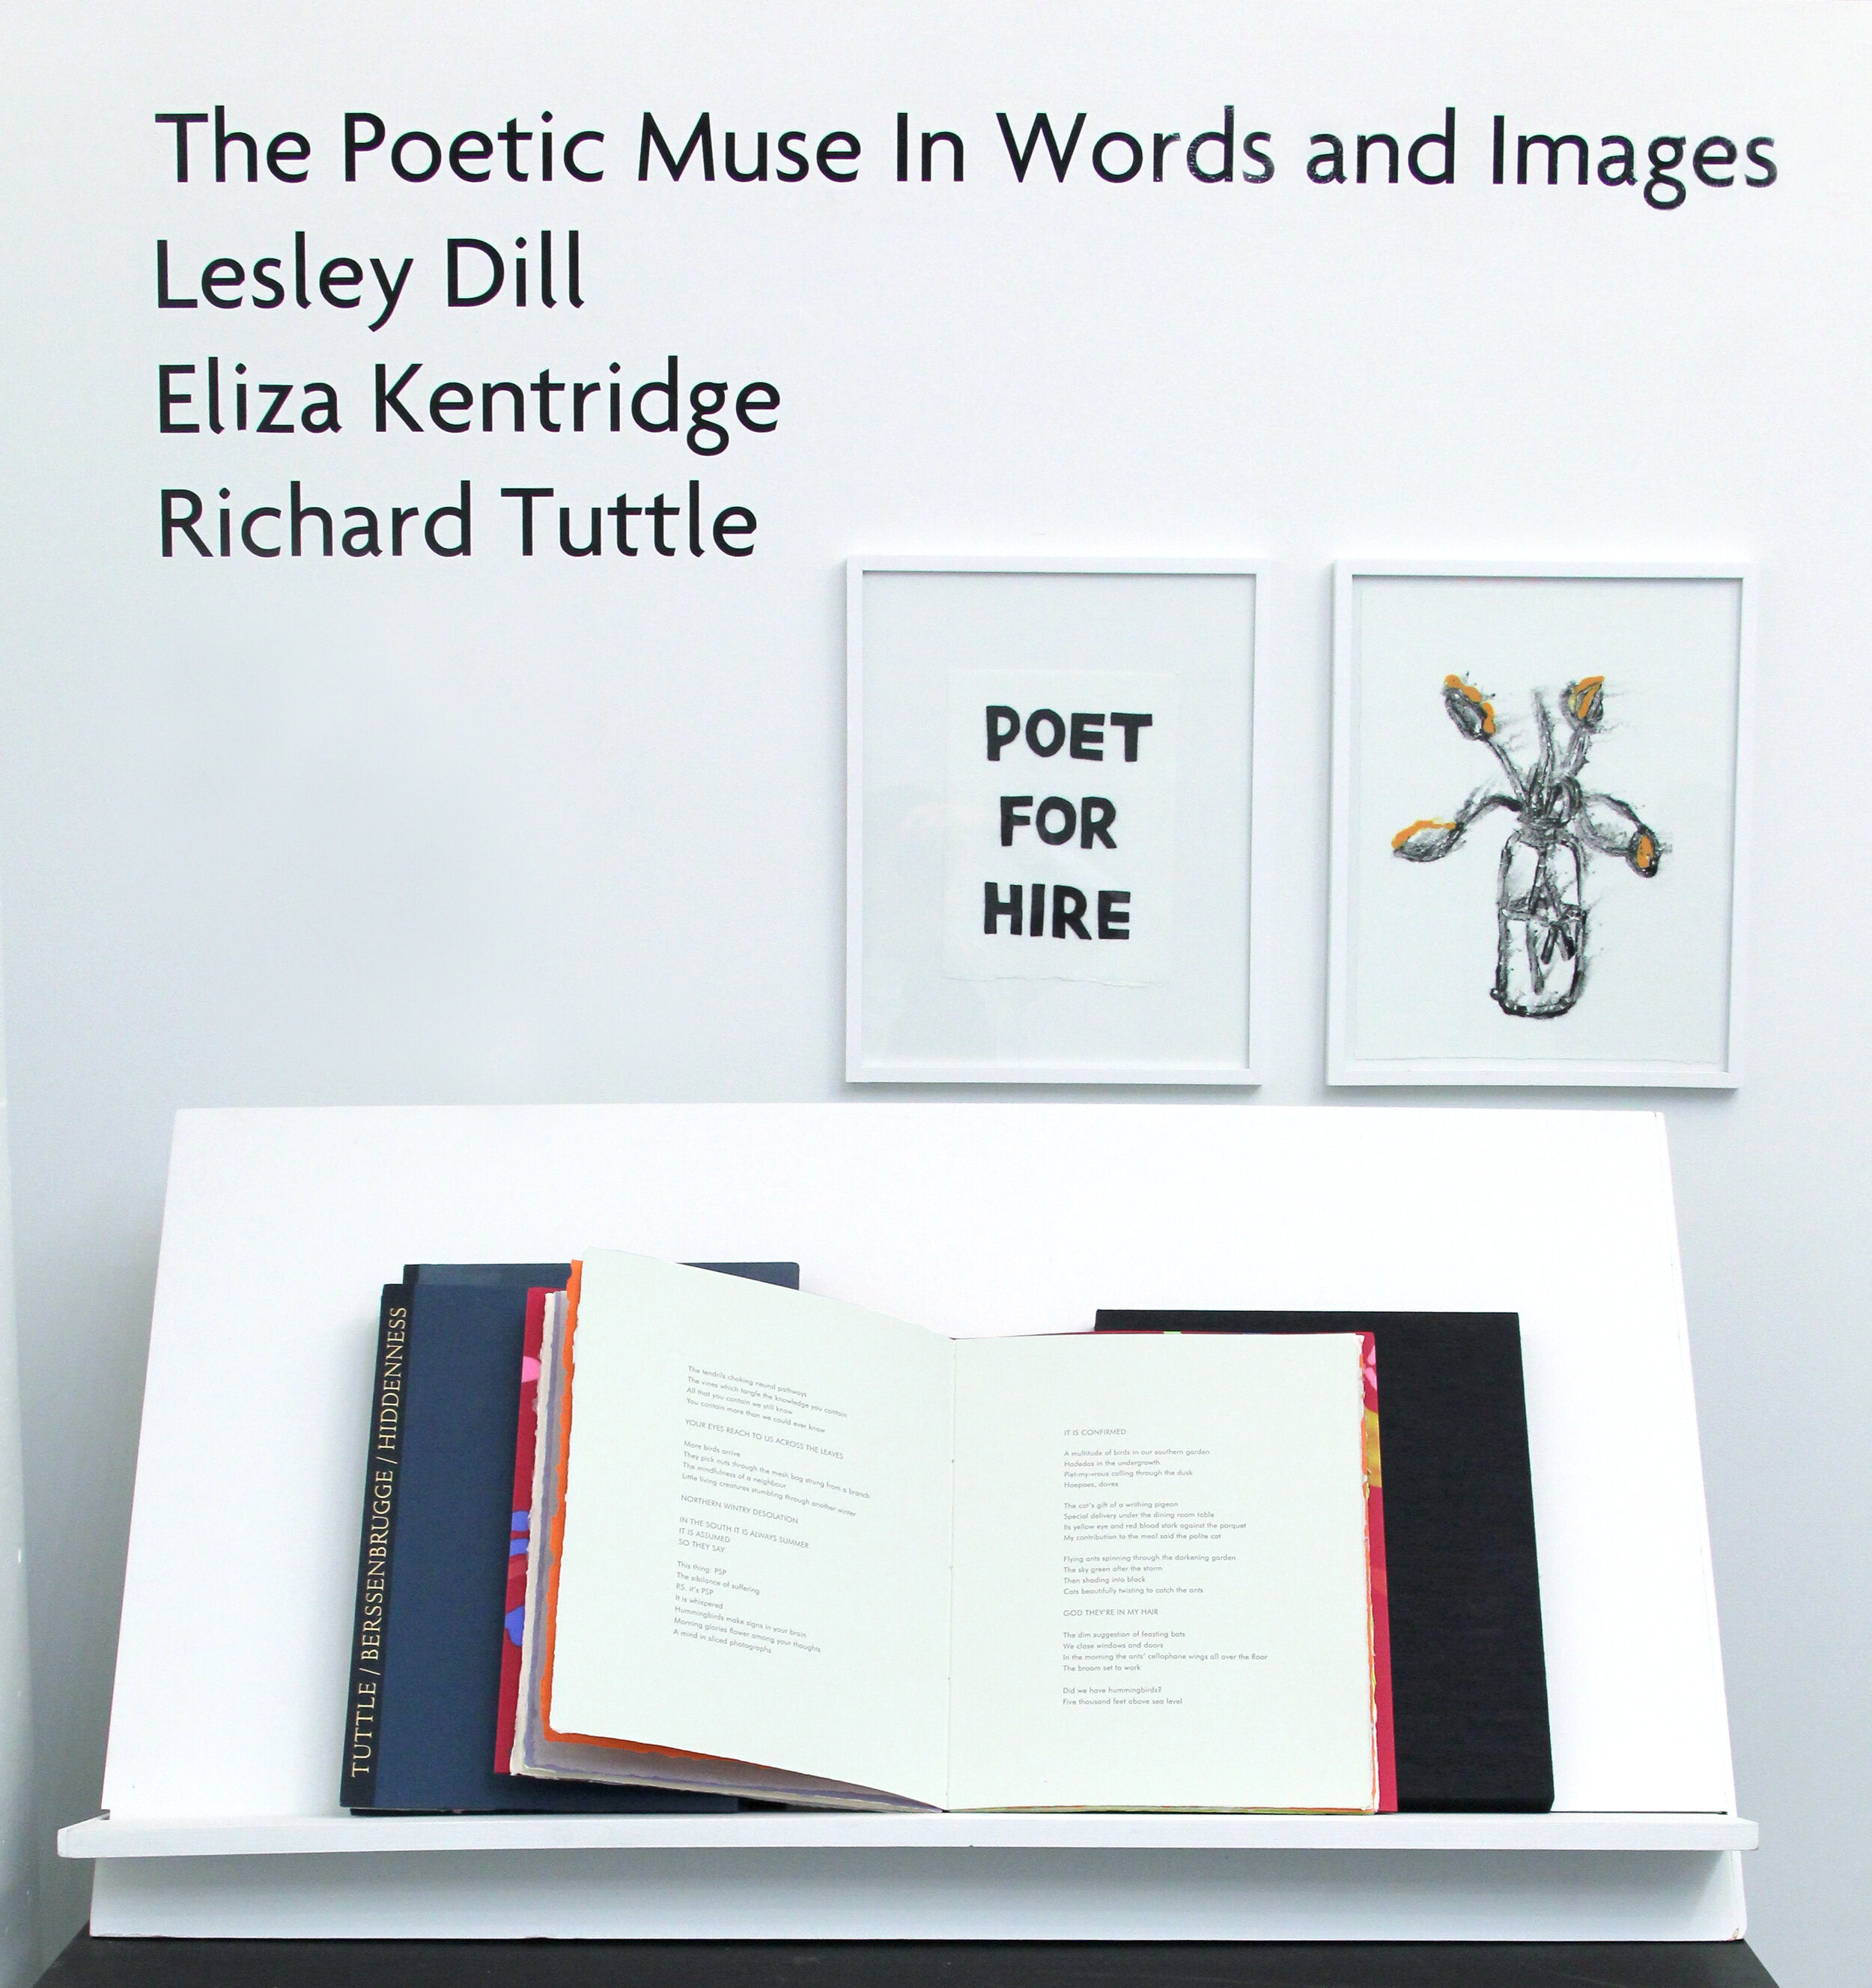 The Poetic Muse In Words and Images